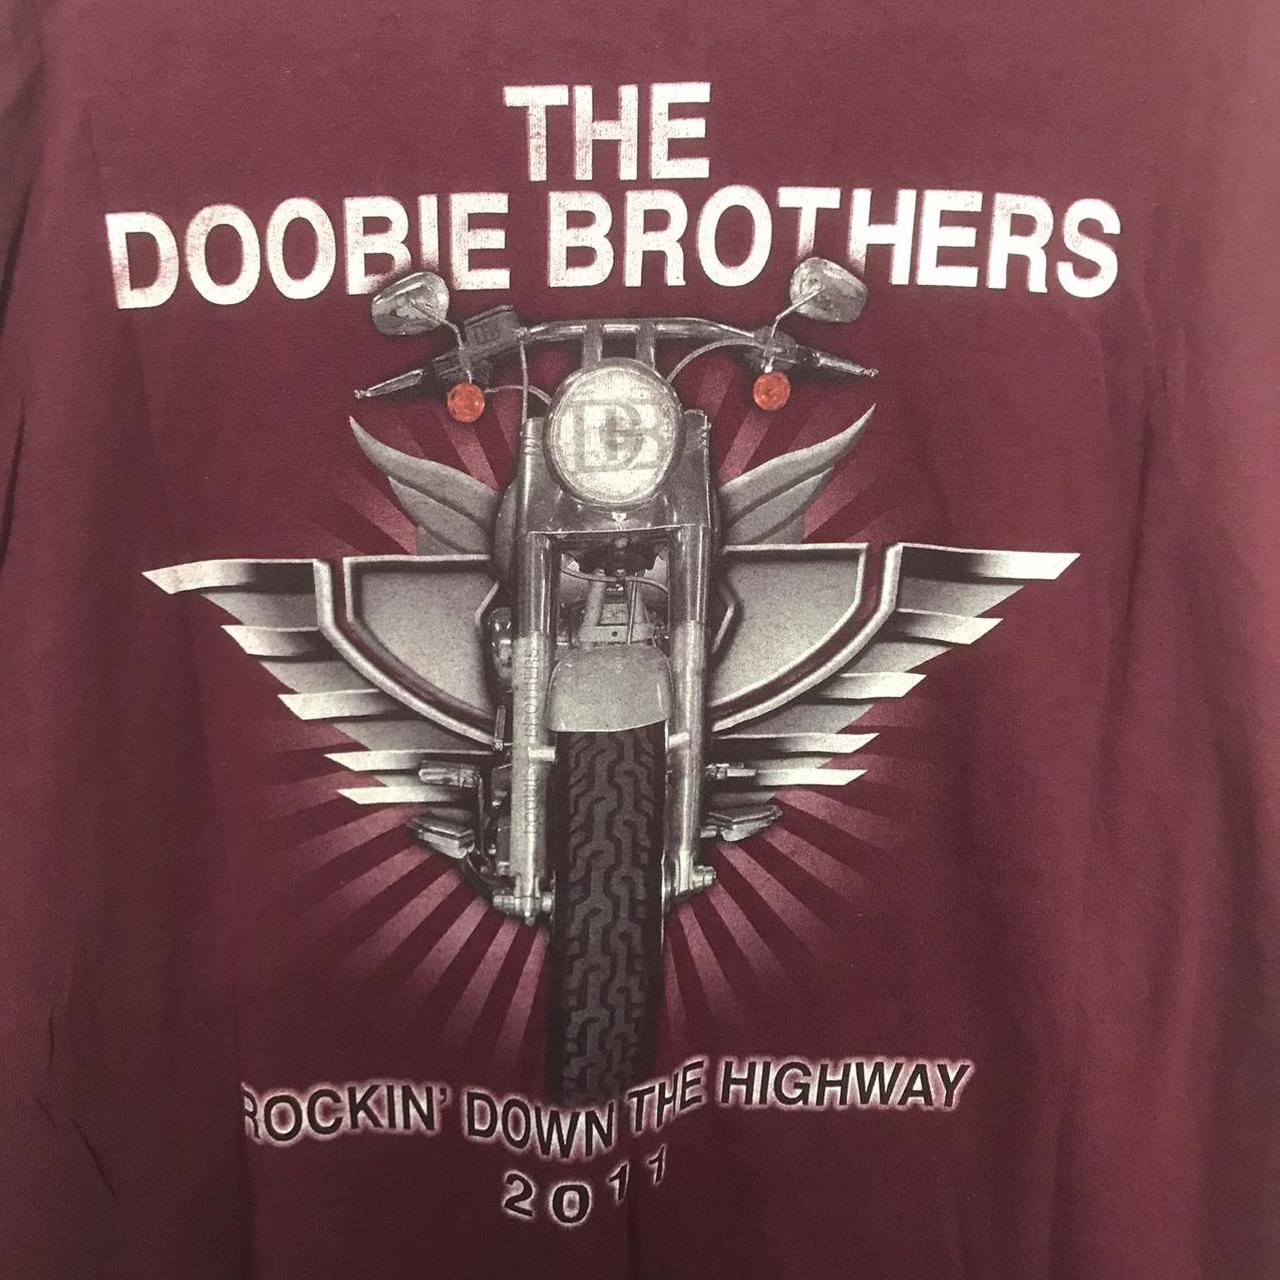 The Doobie Brothers Graphic Motorcycle T Shirt In... - Depop